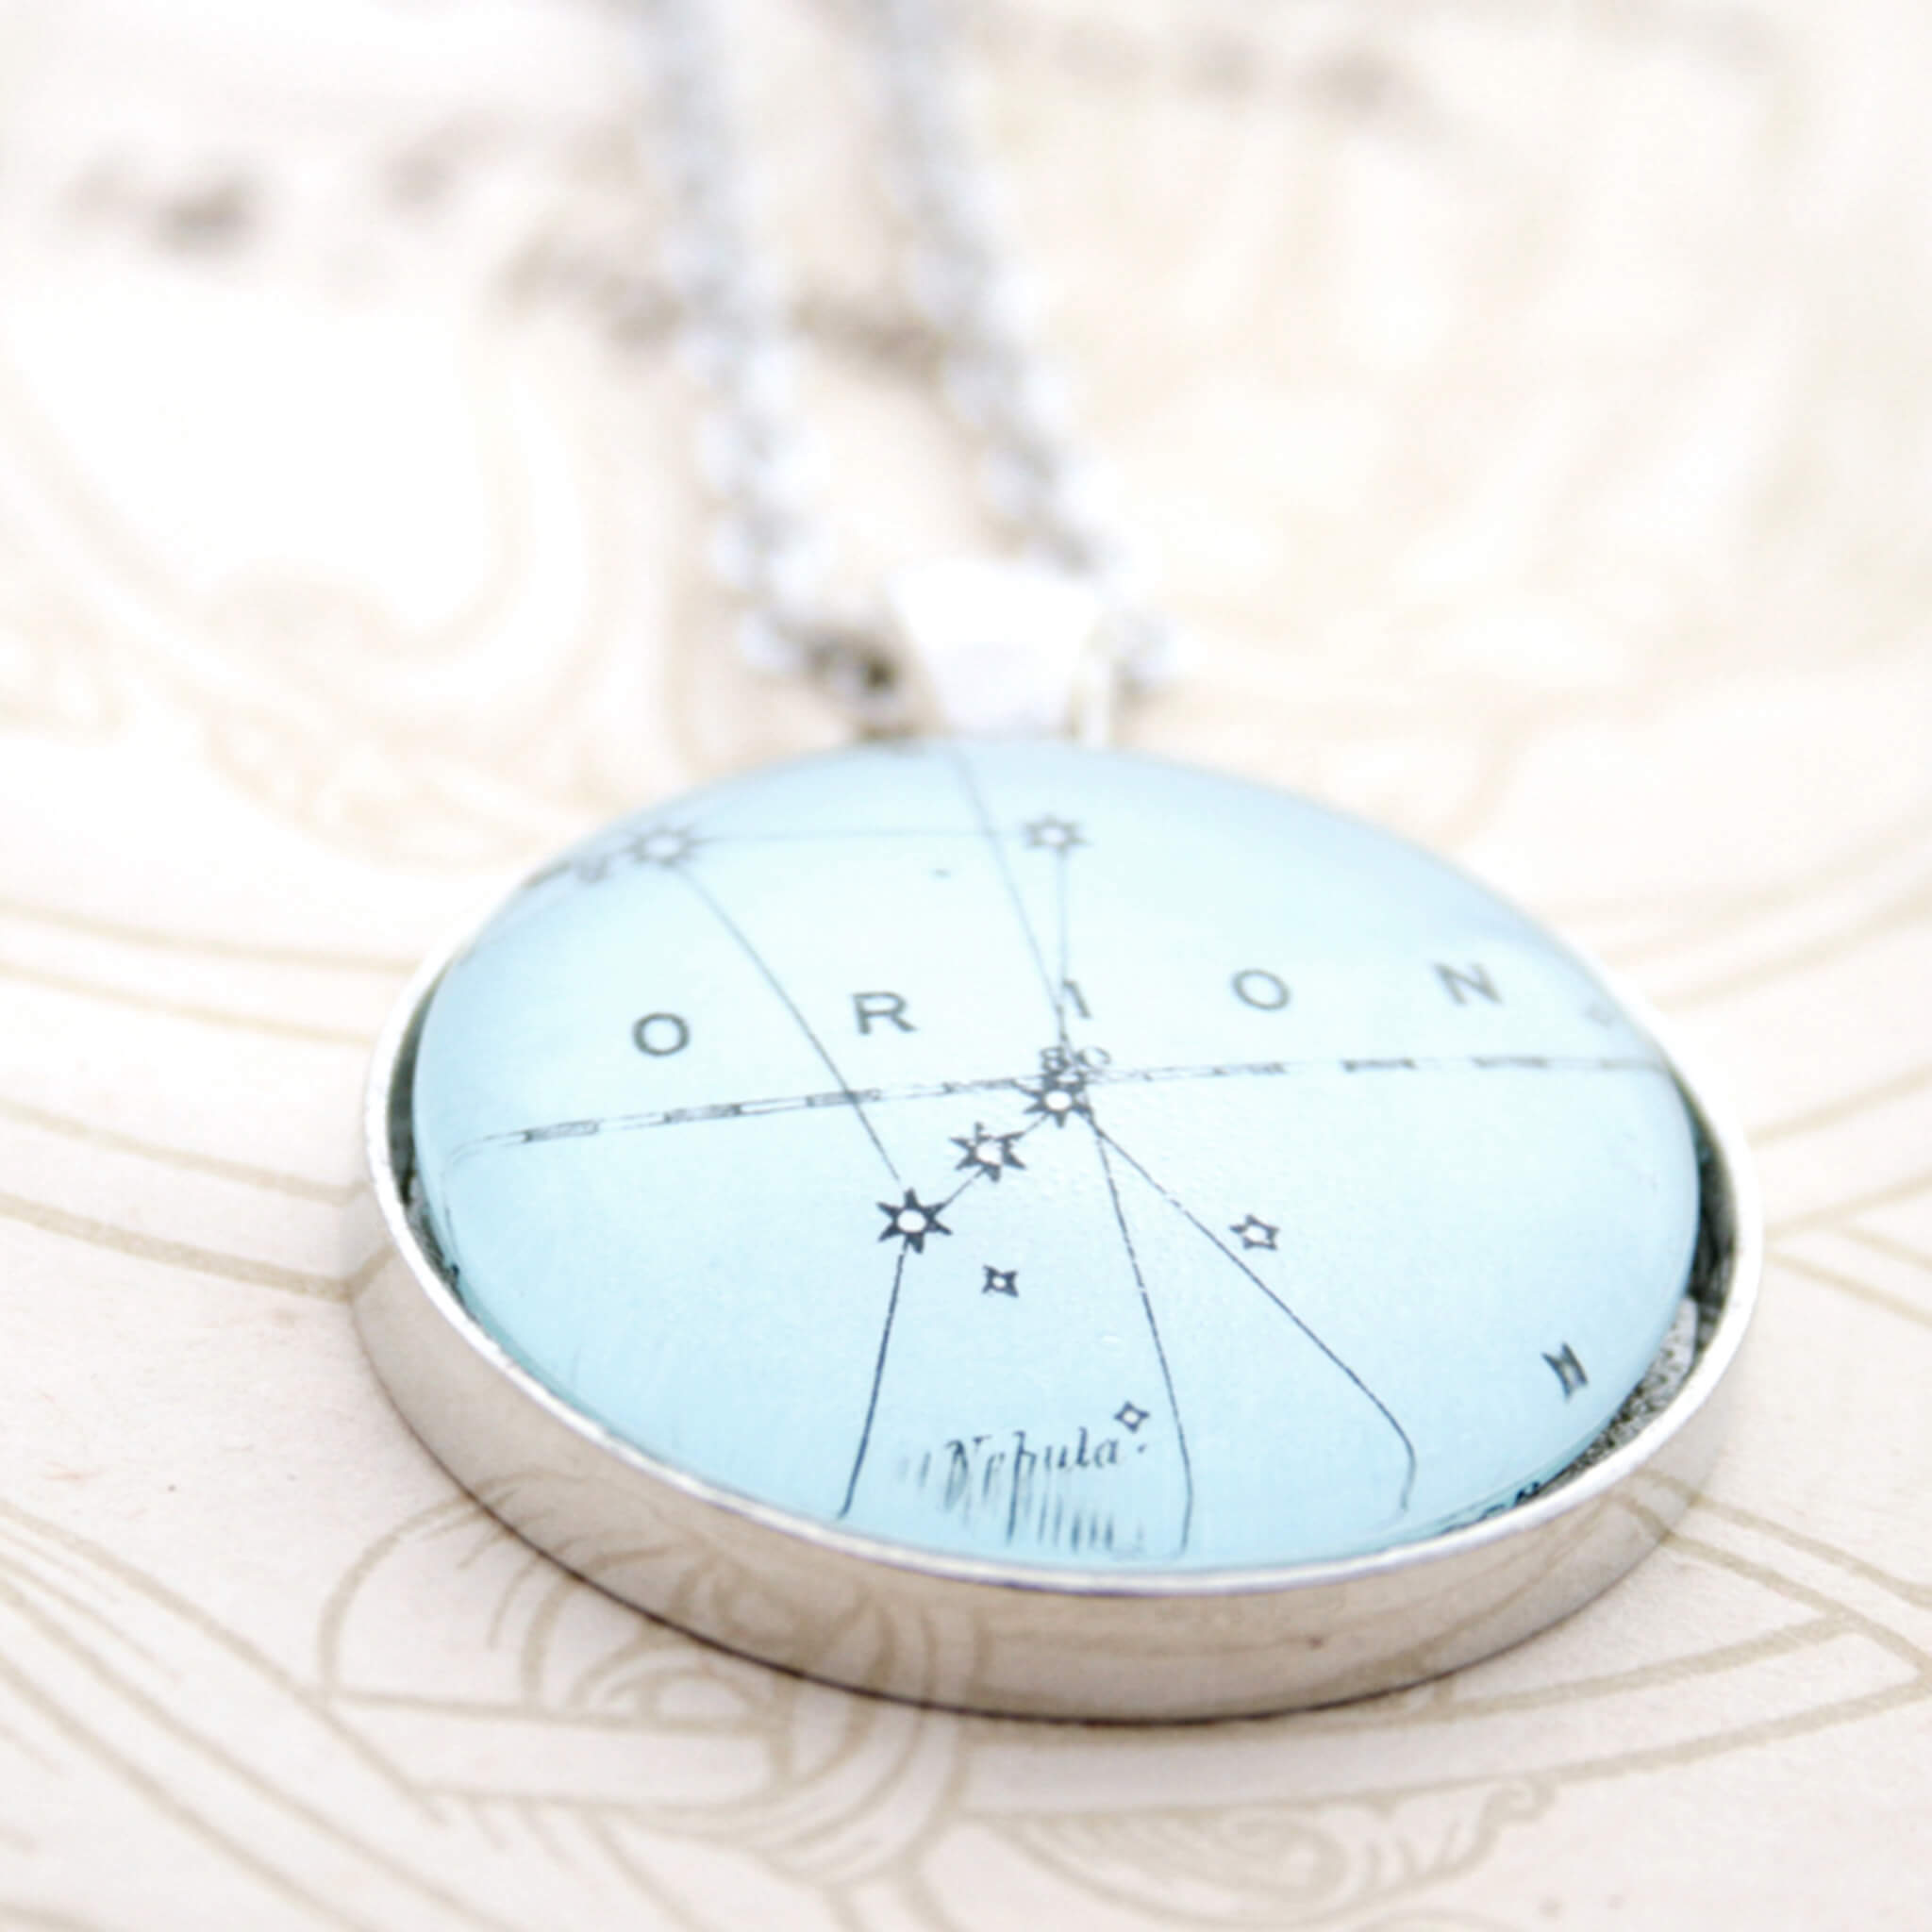 Silver tone pendant necklace featuring map of Orion constellation